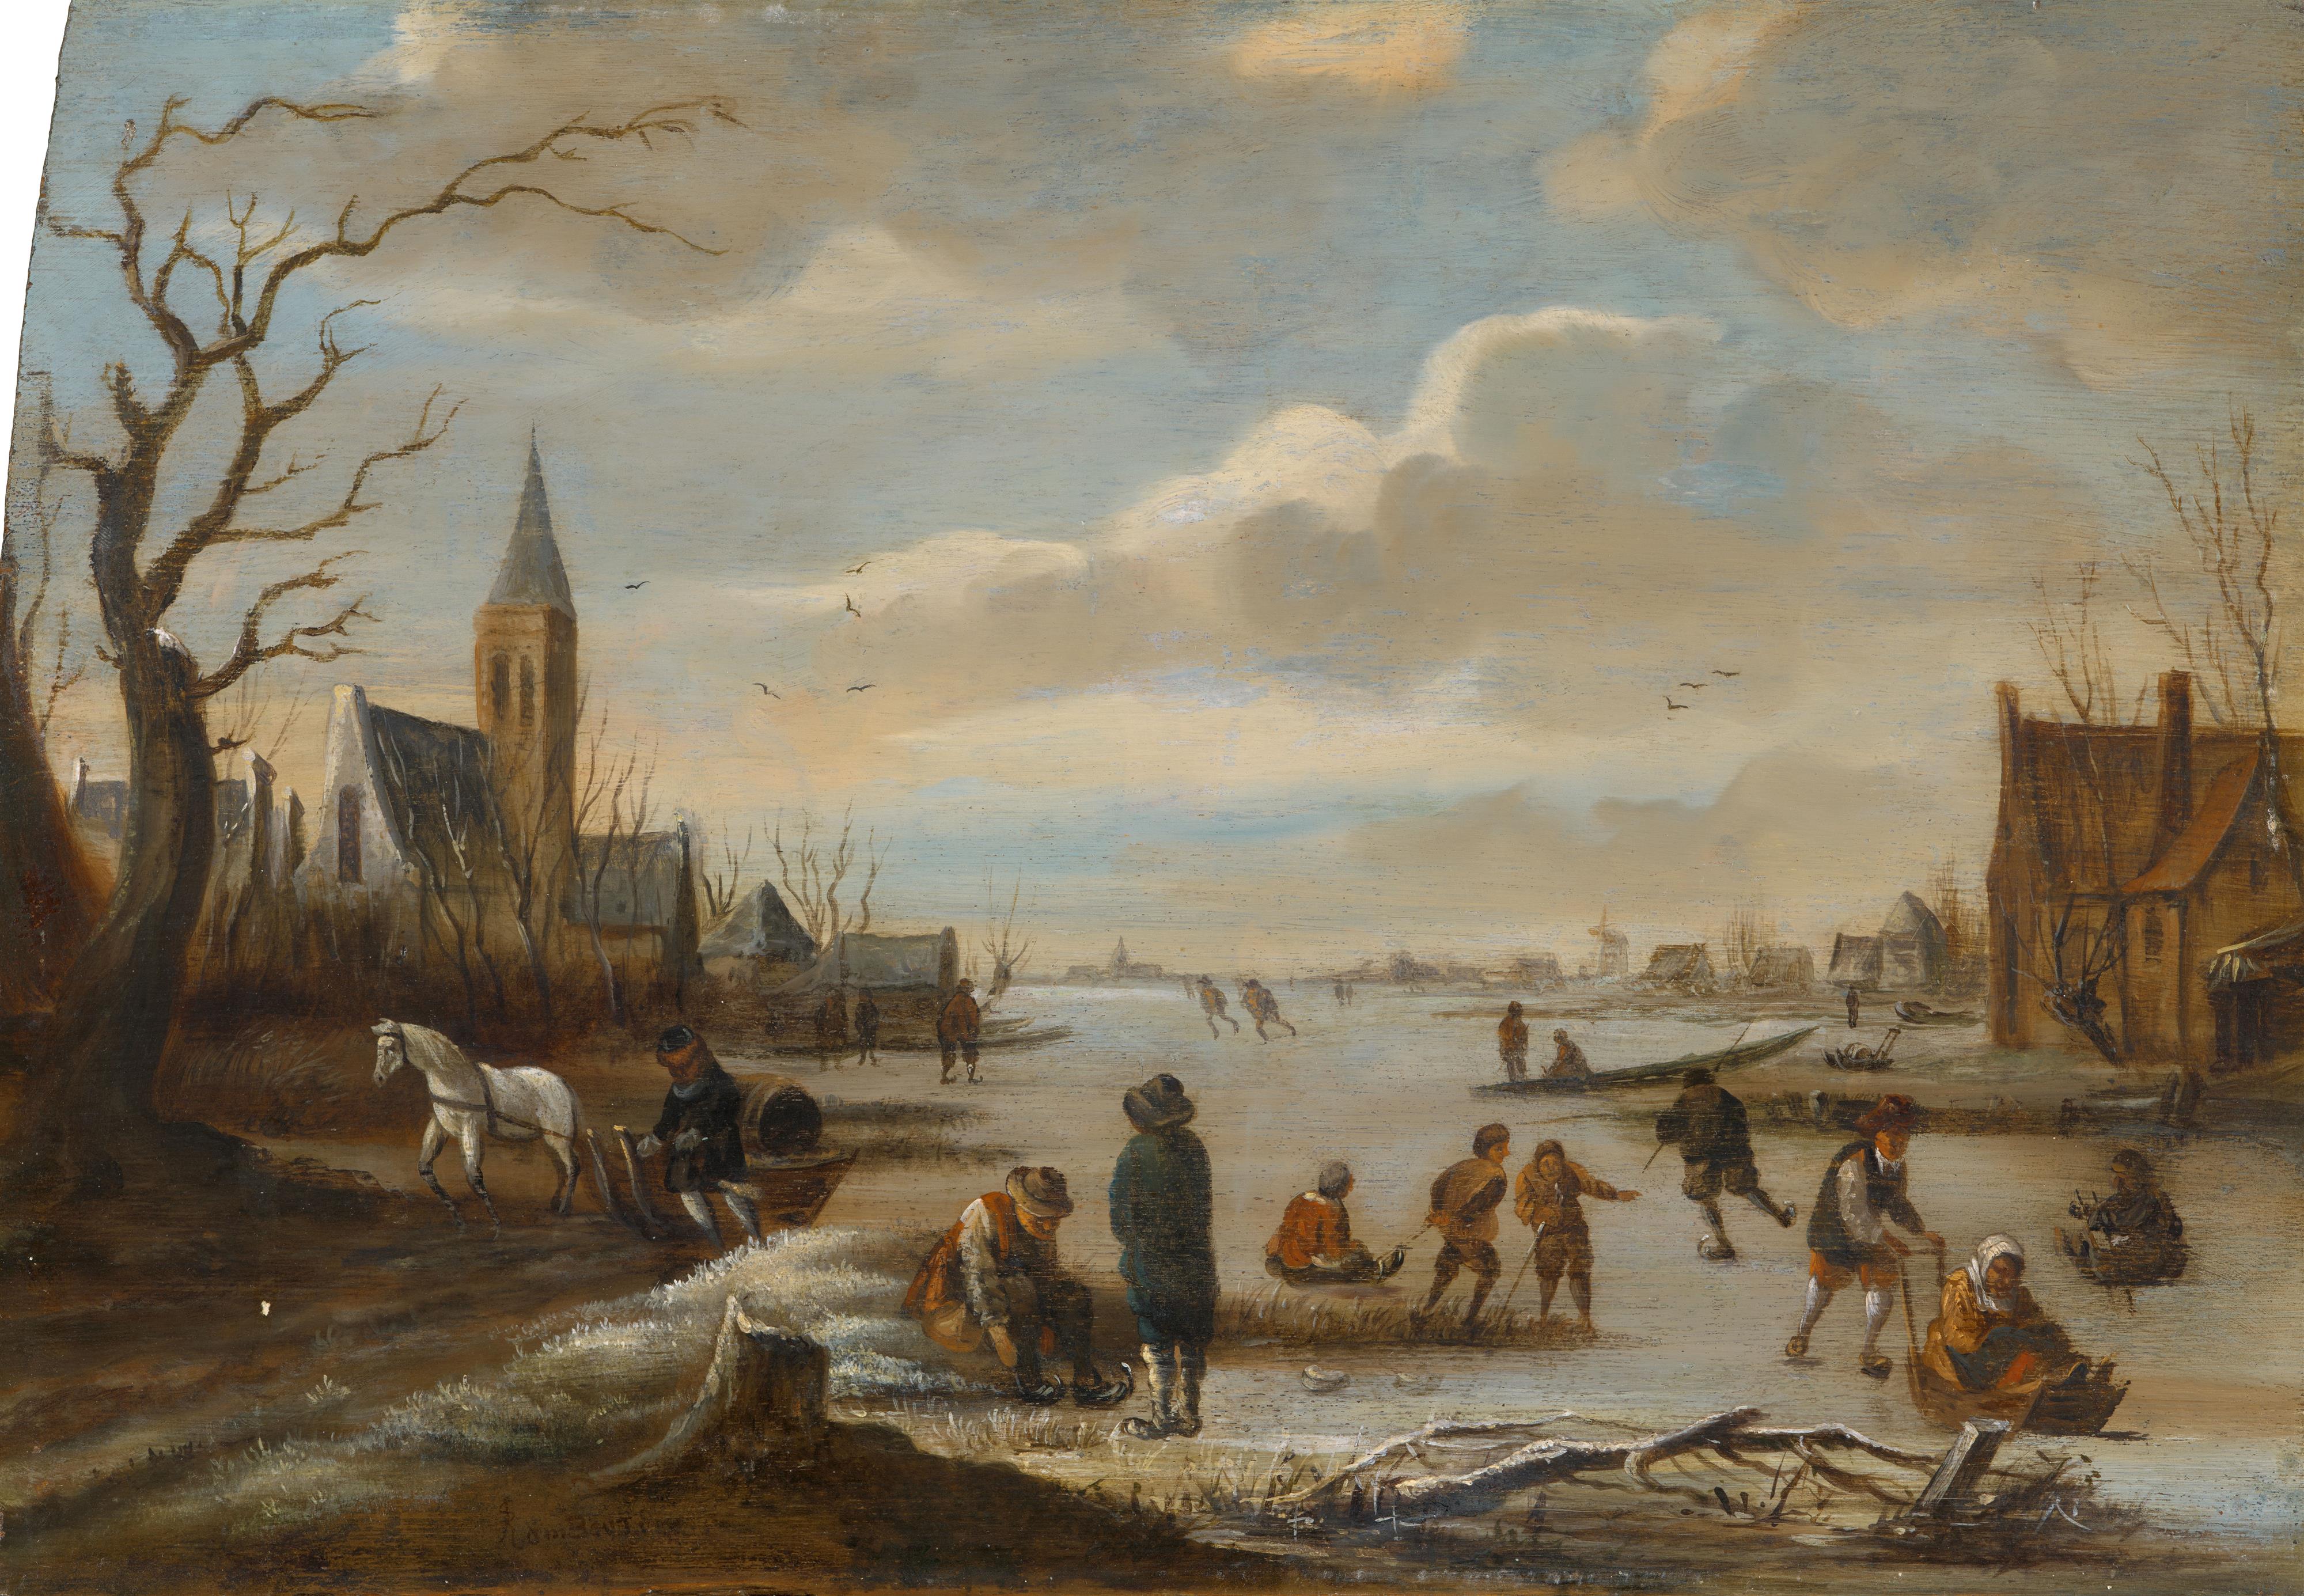 Salomon Rombouts - Ice Skaters and a Cart on a Frozen Canal - image-1